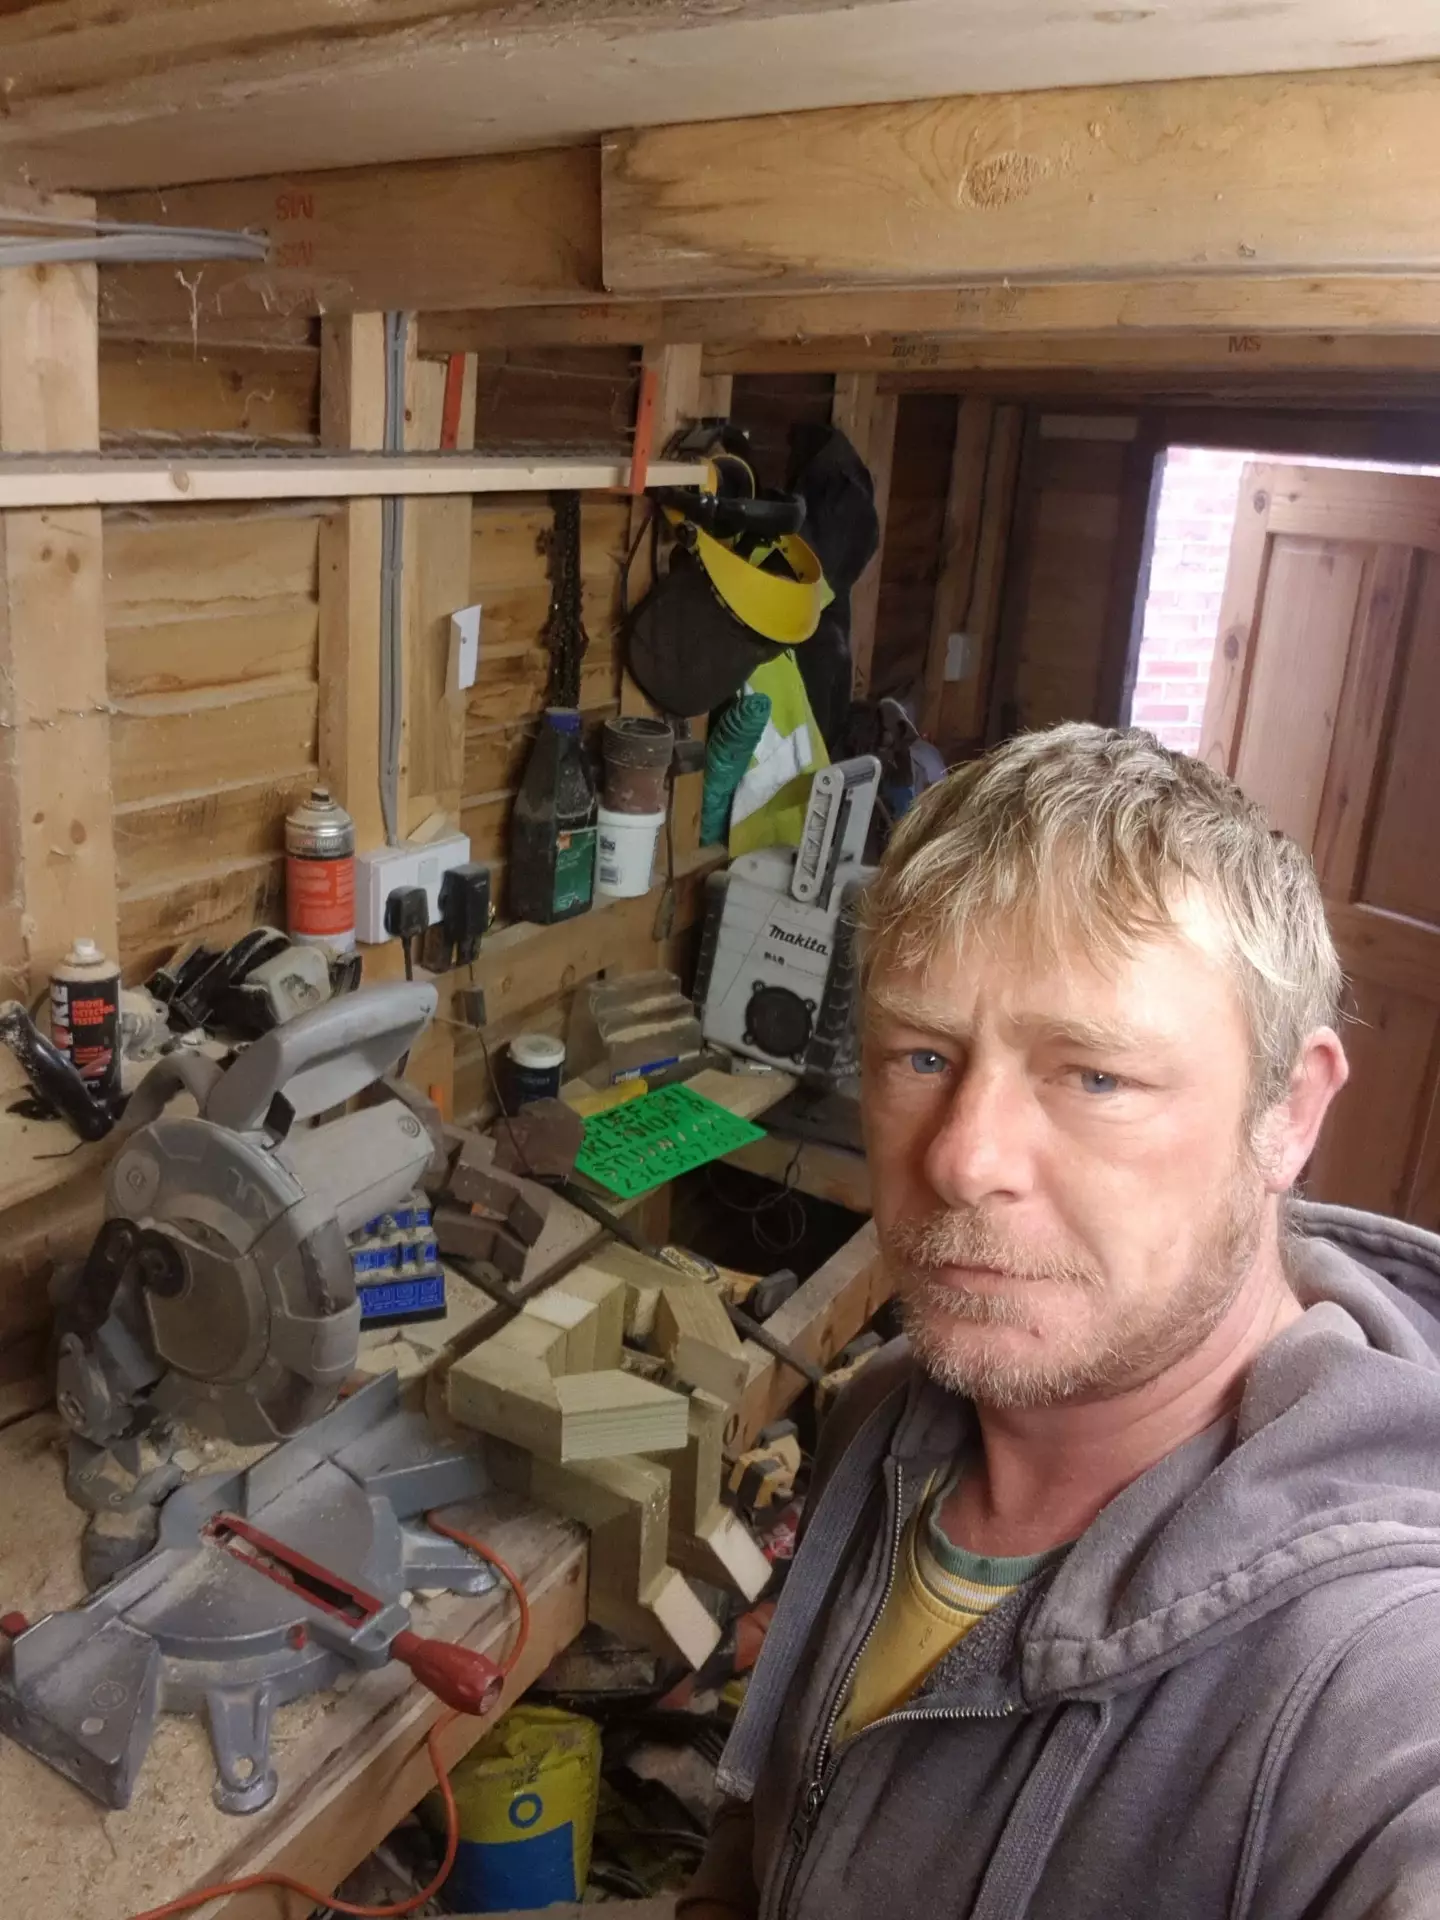 Scott said his business first started in his garden shed.